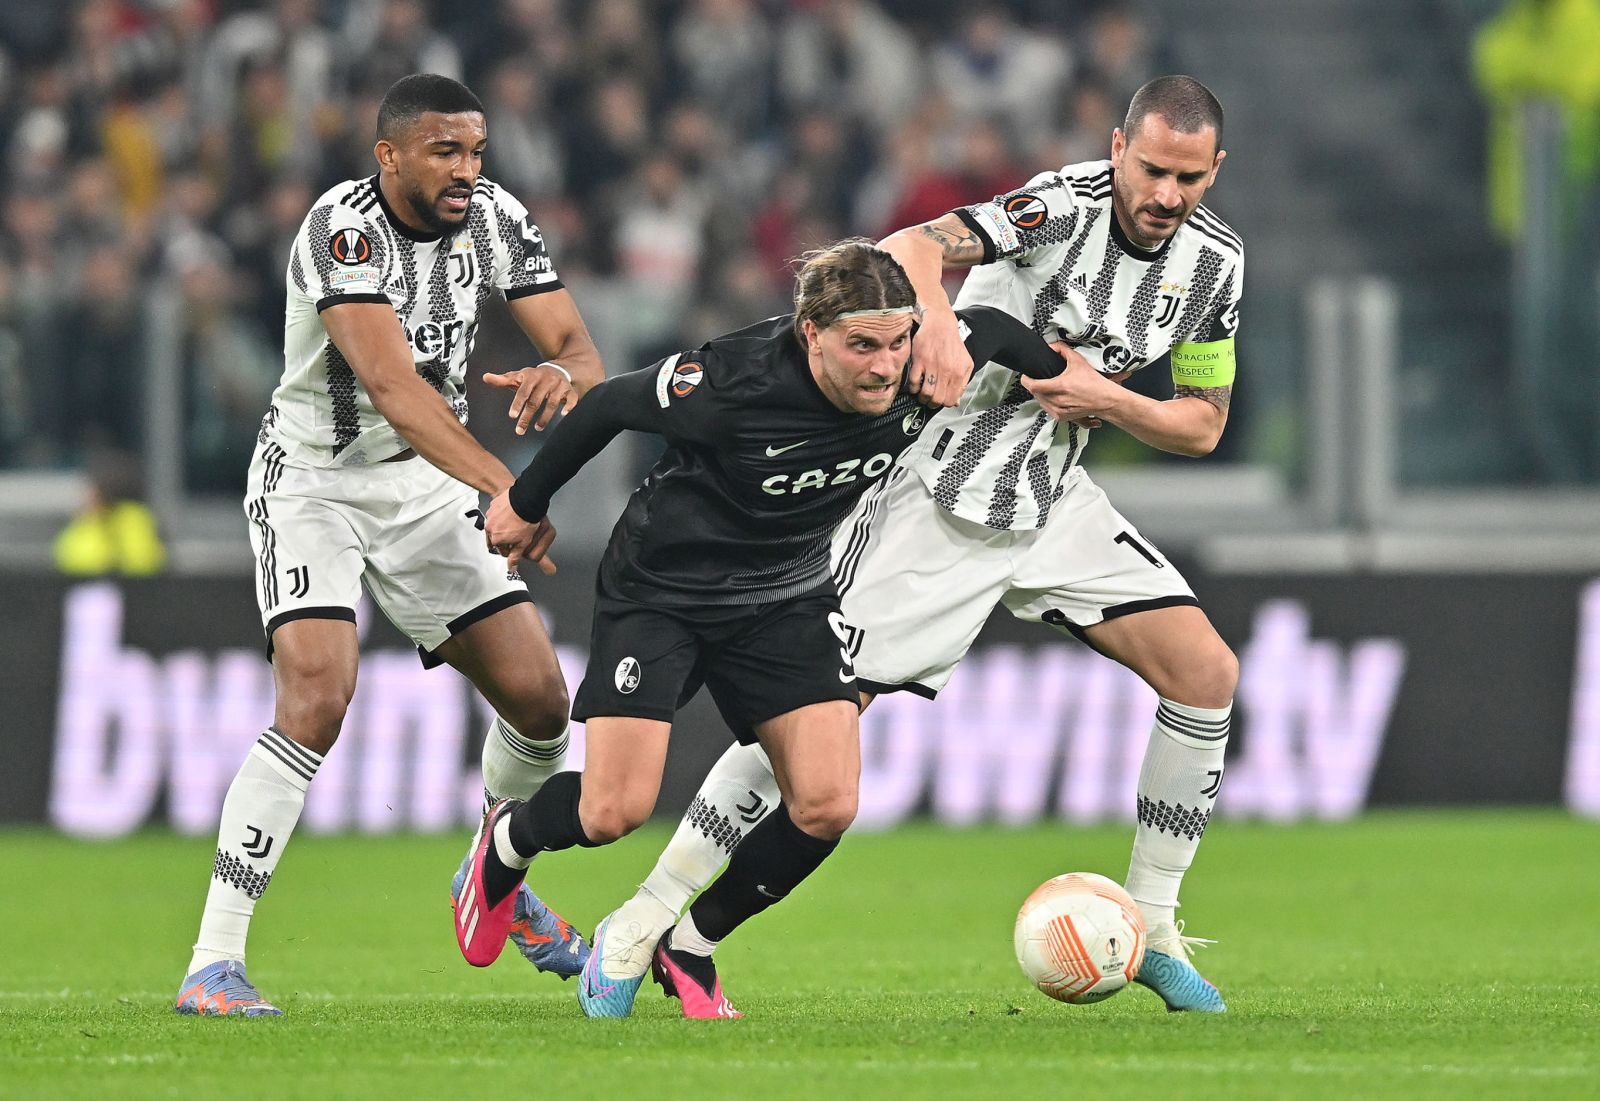 epa10512456 Juventus' Leonardo Bonucci (R) and Gleison Bremer (L) battle for the ball with Freiburg's Lucas Holer (C) during the UEFA Europa League Round of 16, 1st leg match between  Juventus FC and SC Freiburg, in Turin, Italy, 09 March 2023.  EPA/ALESSANDRO DI MARCO